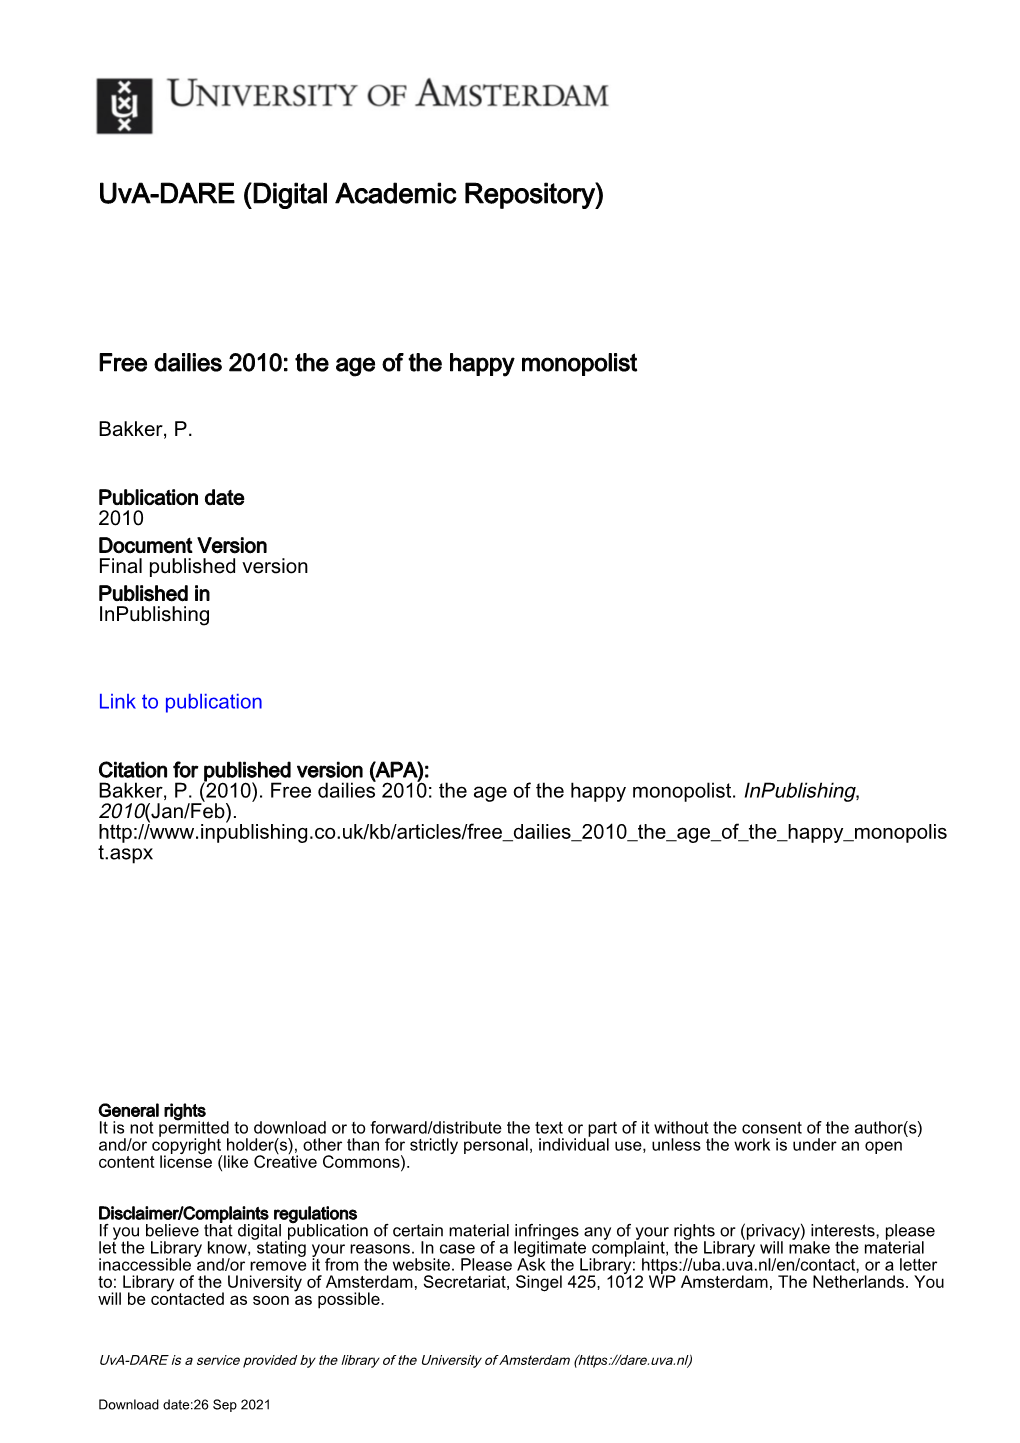 Free Dailies 2010: the Age of the Happy Monopolist